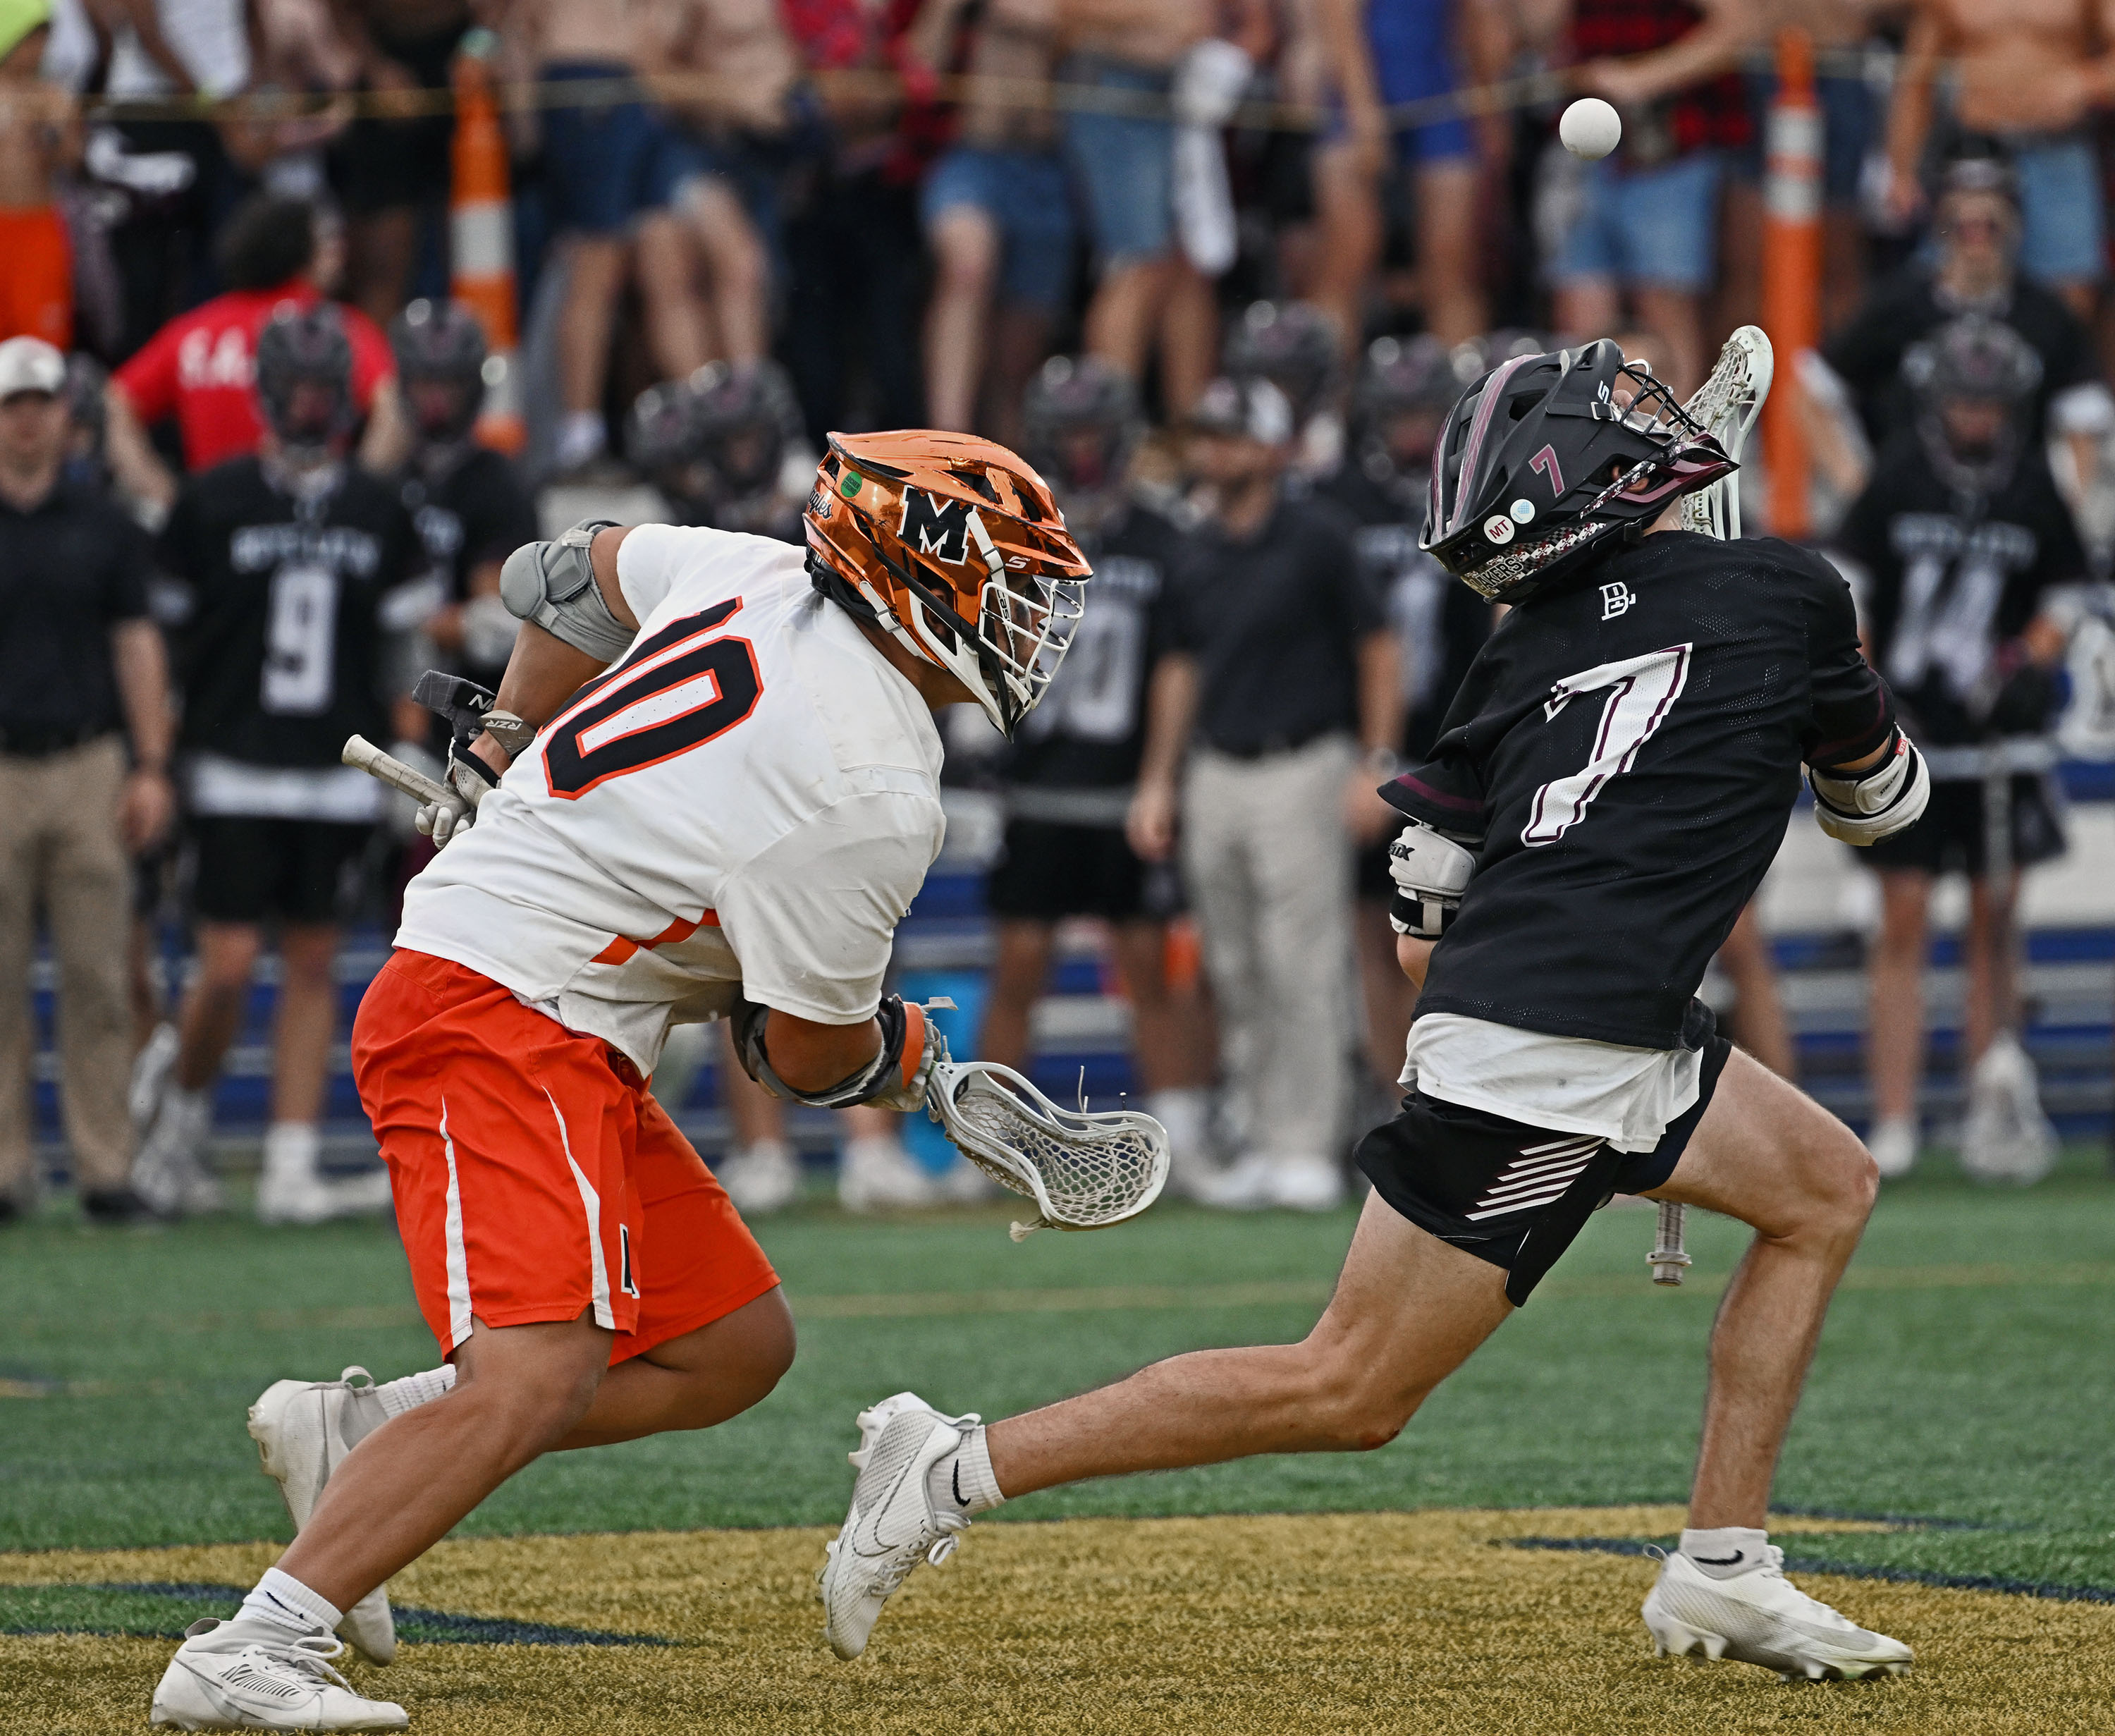 Boys' Latin's Parker Hoffman, right, looks to control the ball after facing off against Mconogh's Peyton Makowiecki, left, to start overtime. McDonogh defeated Boys' Latin 8-7 in MIAA A boys lacrosse semifinals at the Navy Marine Corps Memorial Stadium.May 16, 2023